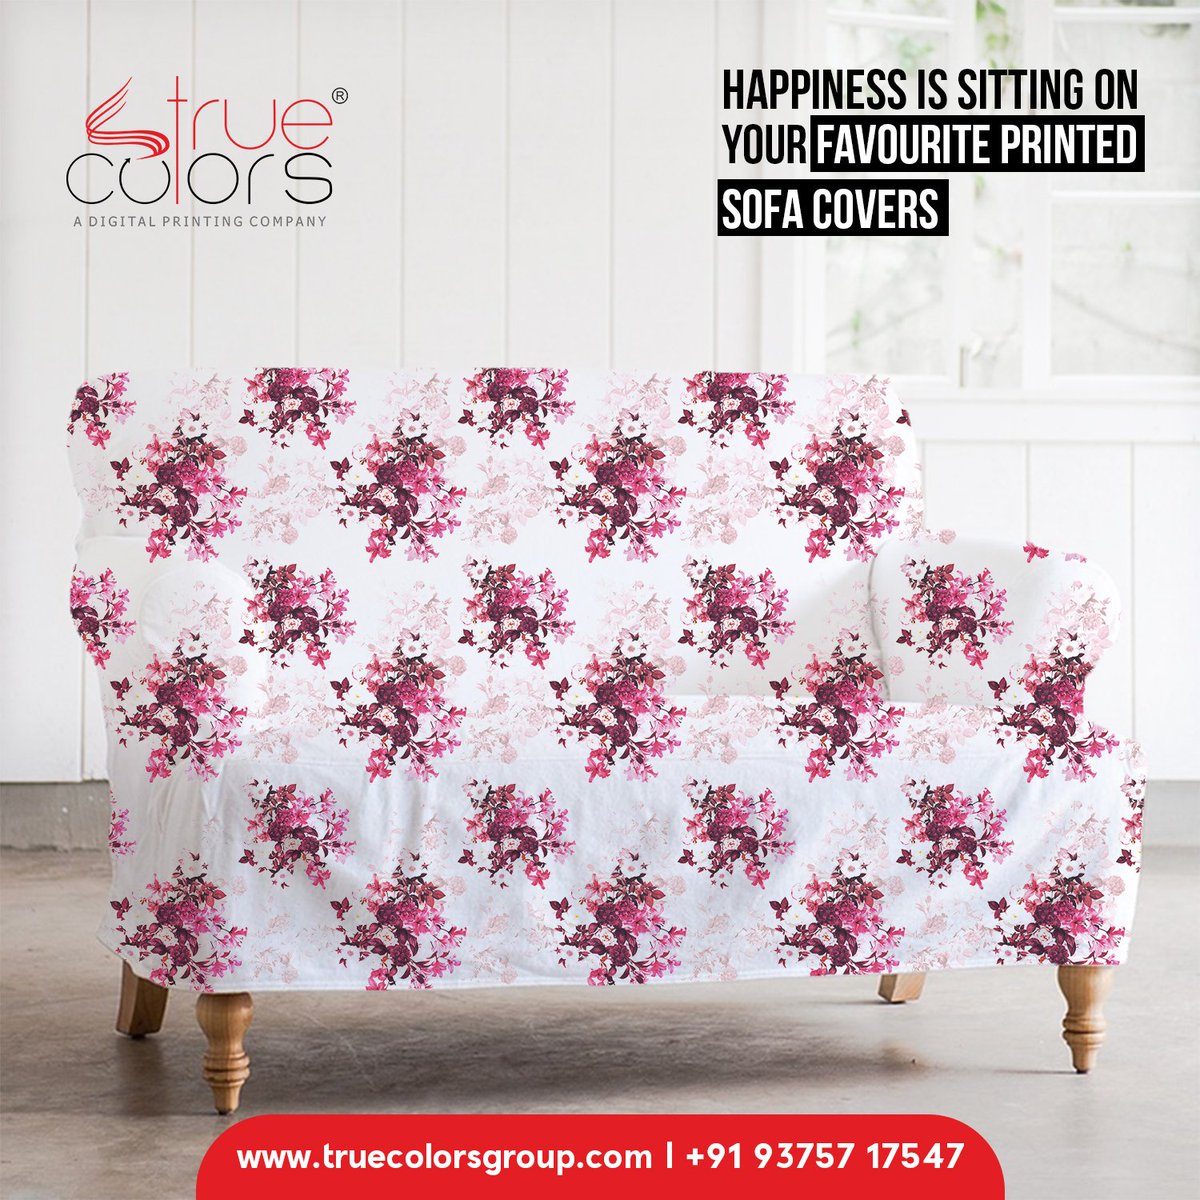 Happiness in sitting on your favourite printed sofa cover!
Visit : truecolorsgroup.com
#fabric #colors #truecolors #surat #machine #printing #fashion #consistency #production #digitalprinting #textile #productprinting